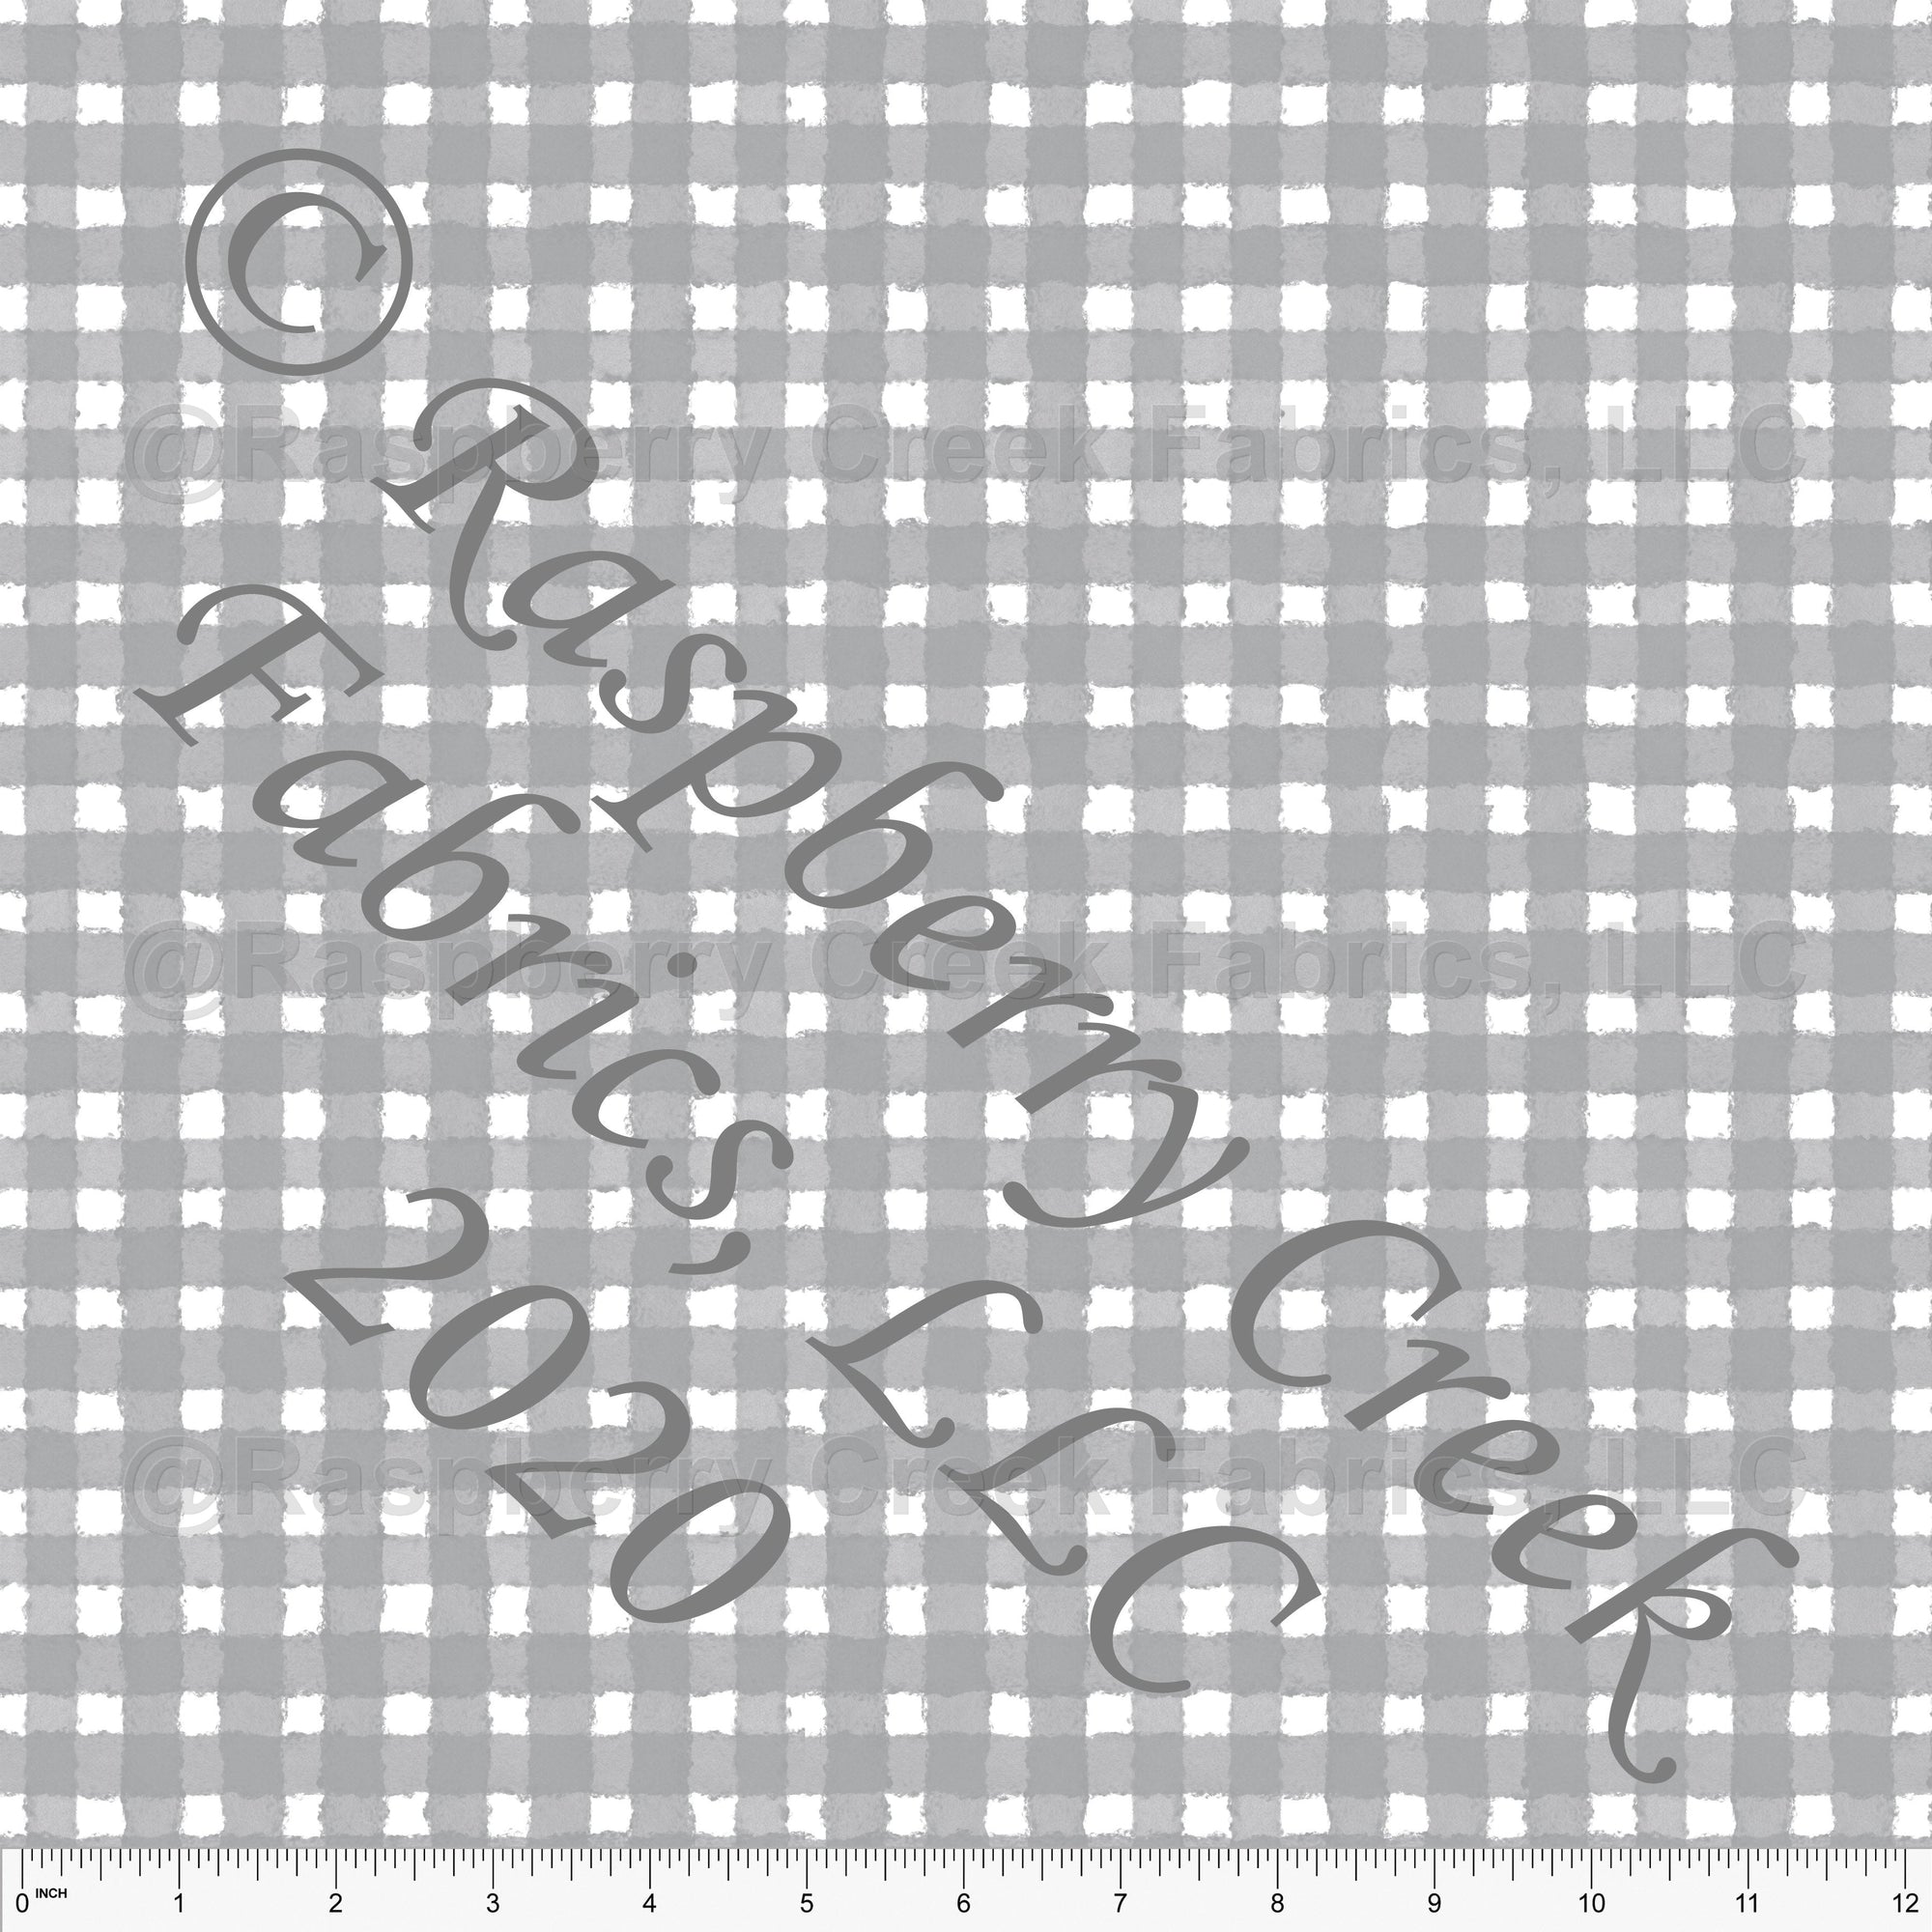 Grey and White Painted Check Gingham, By Bri Powell for Club Fabrics Fabric, Raspberry Creek Fabrics, watermarked